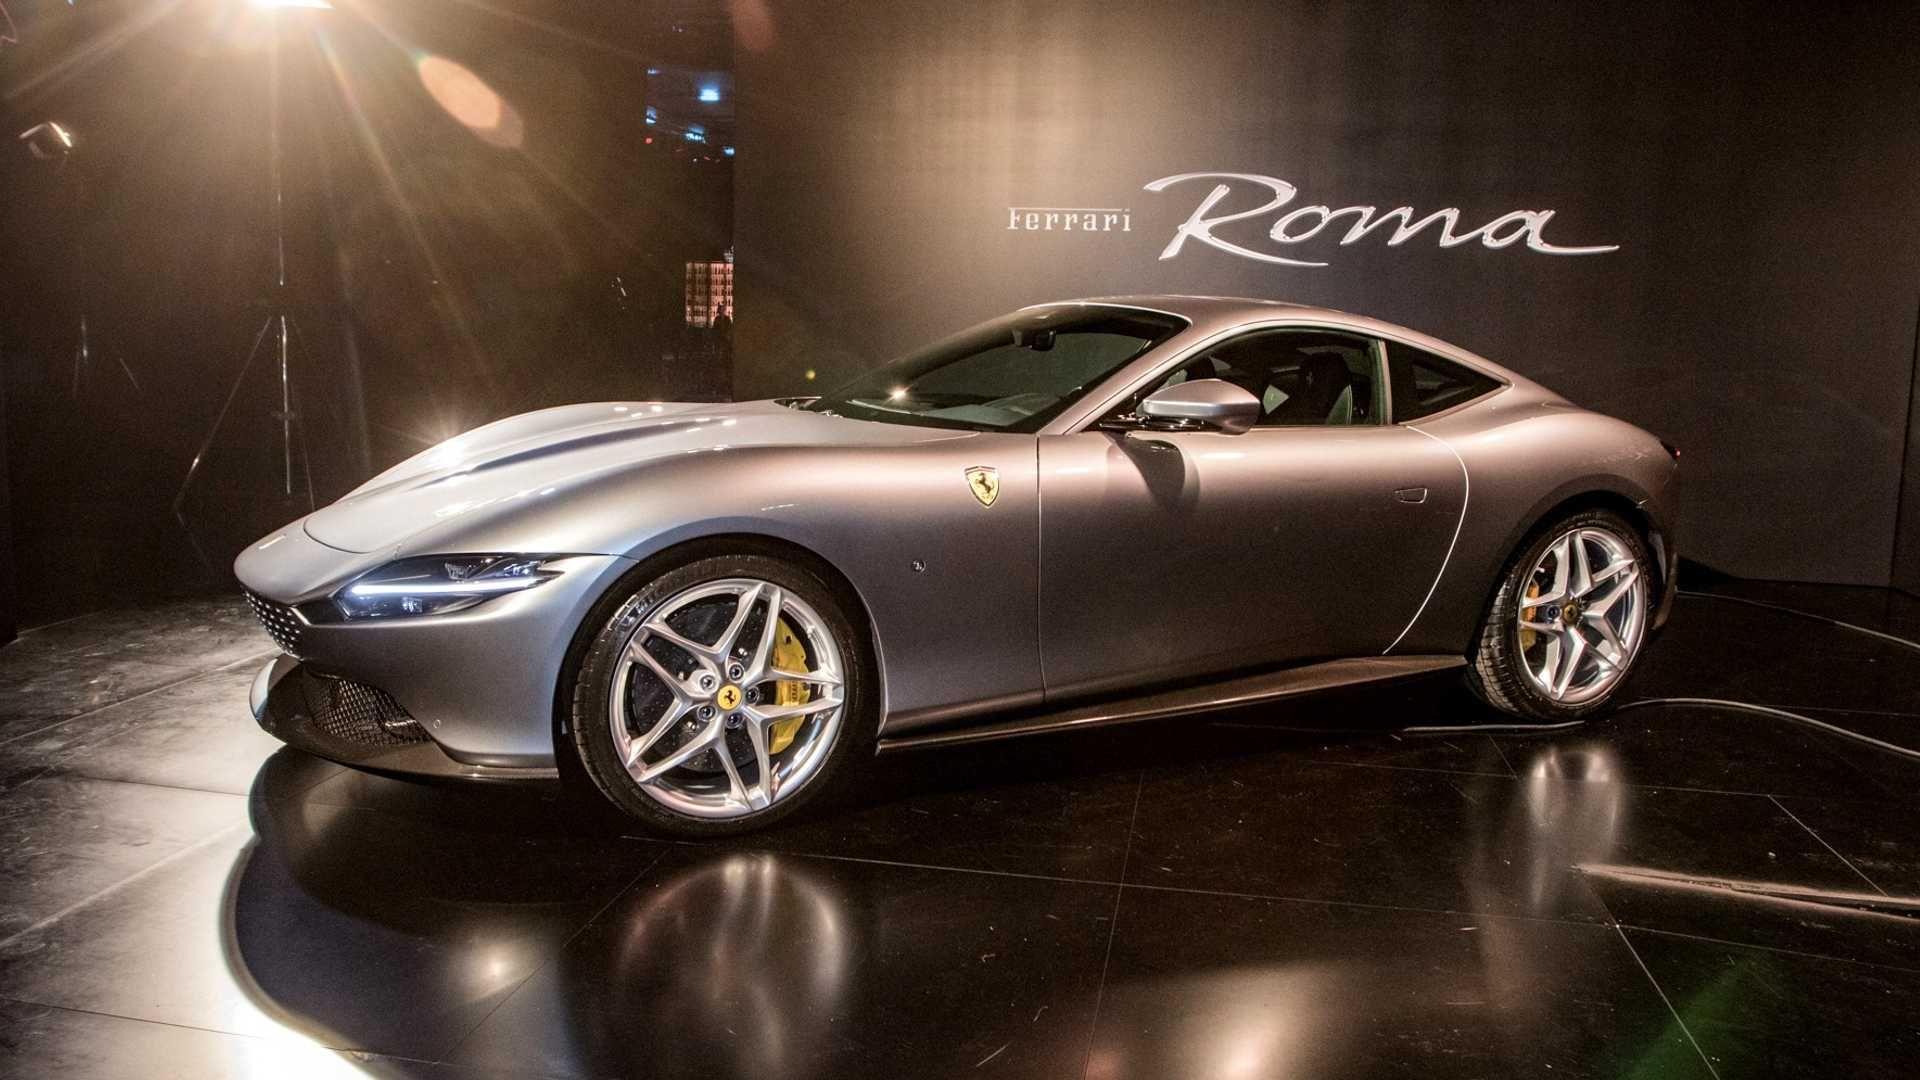 Ferrari Roma shows off its sleek styling in live photo